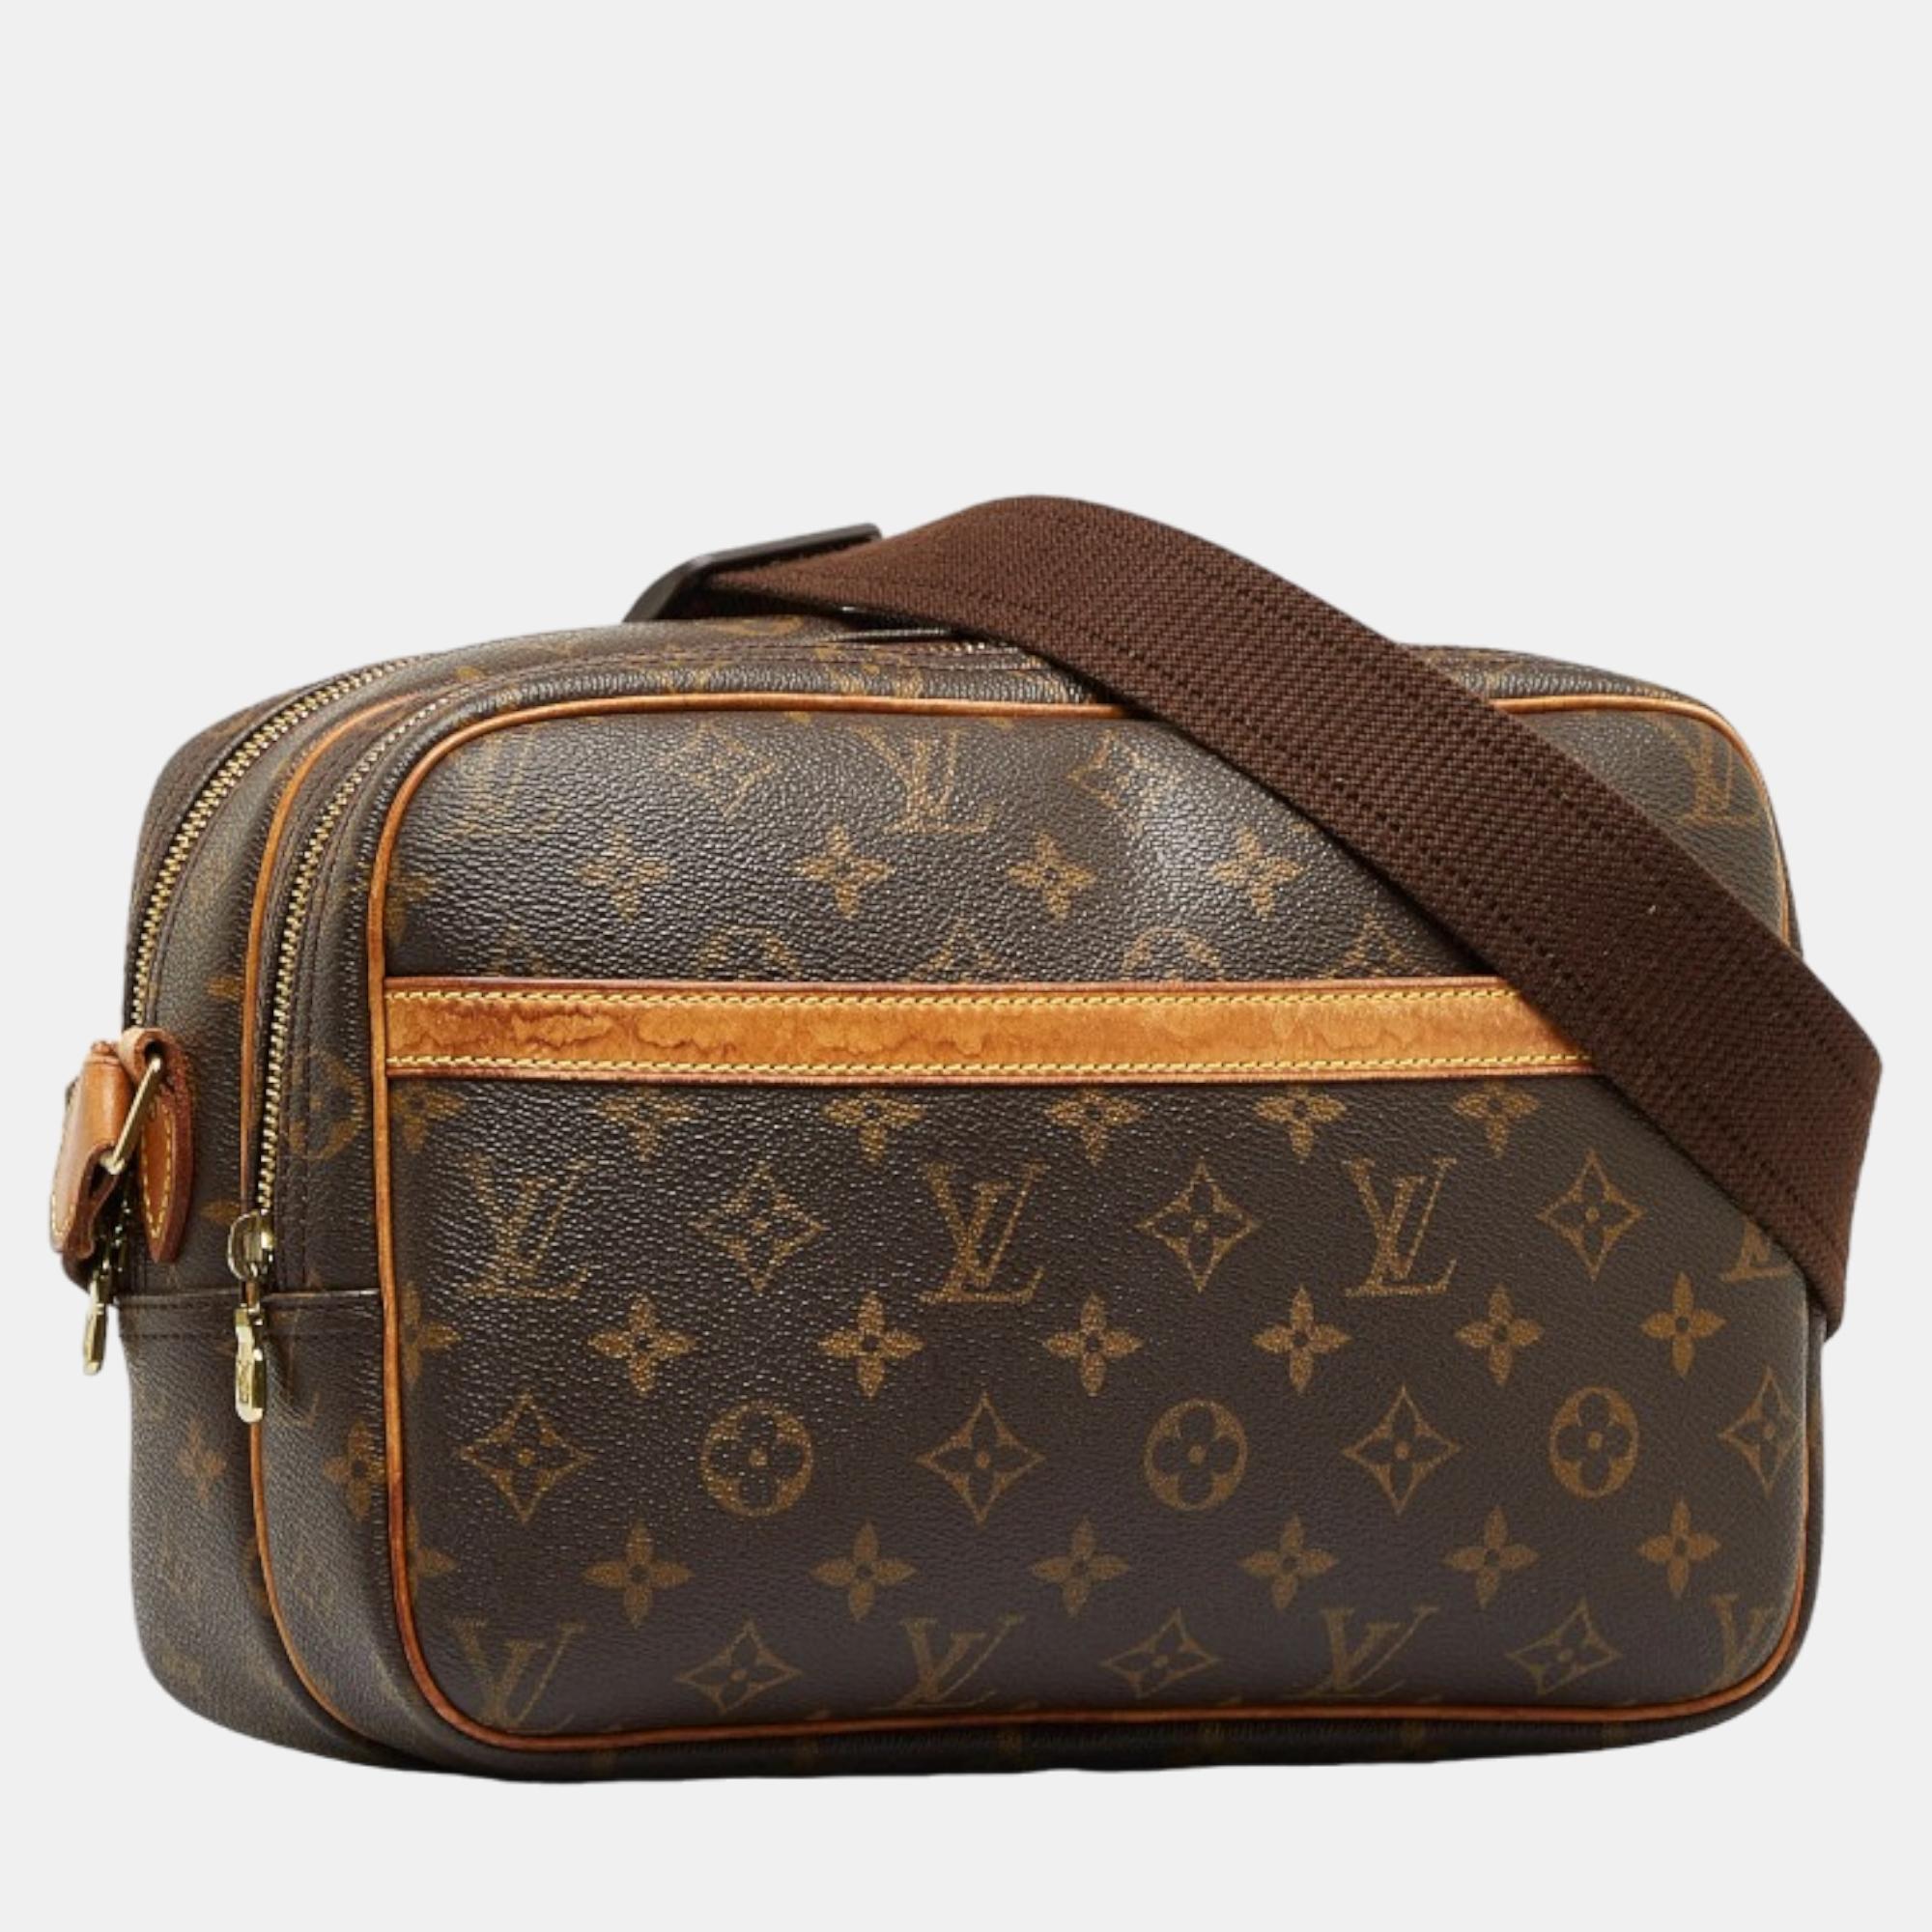 Louis Vuitton Reporter bag (vintage) - clothing & accessories - by